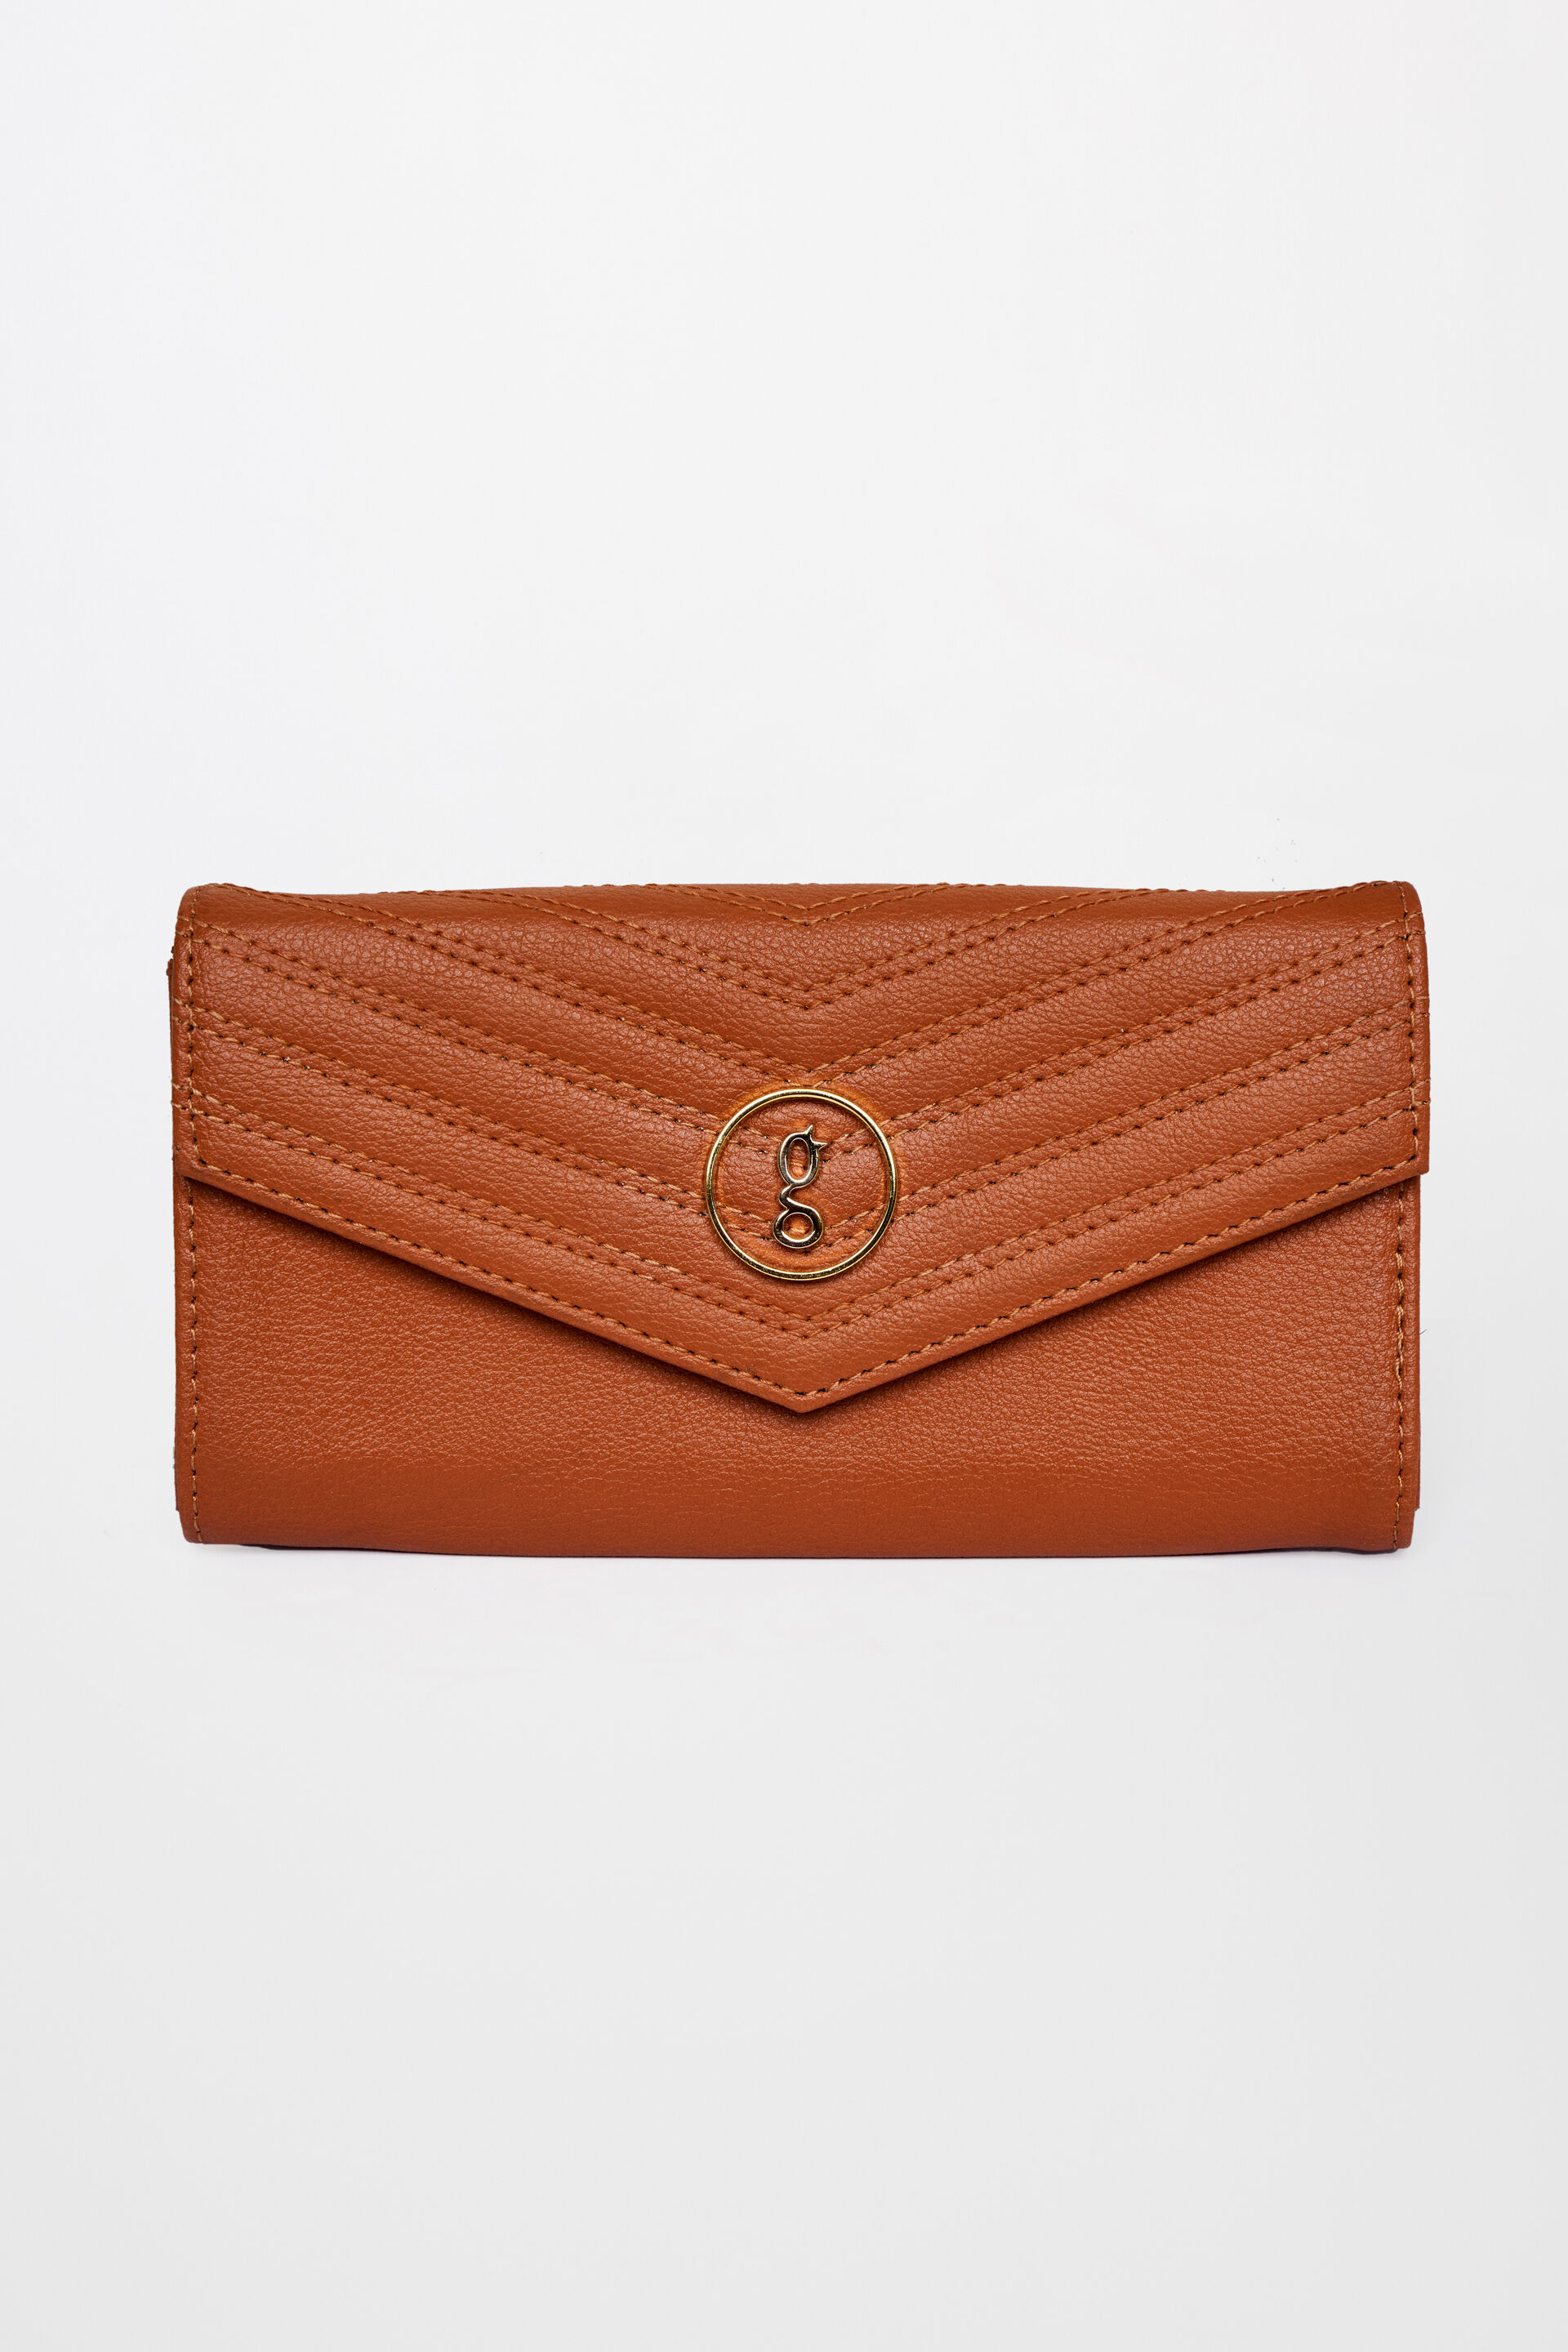 Buy Embossed Leather Wallet (Multi-Compartment) Online